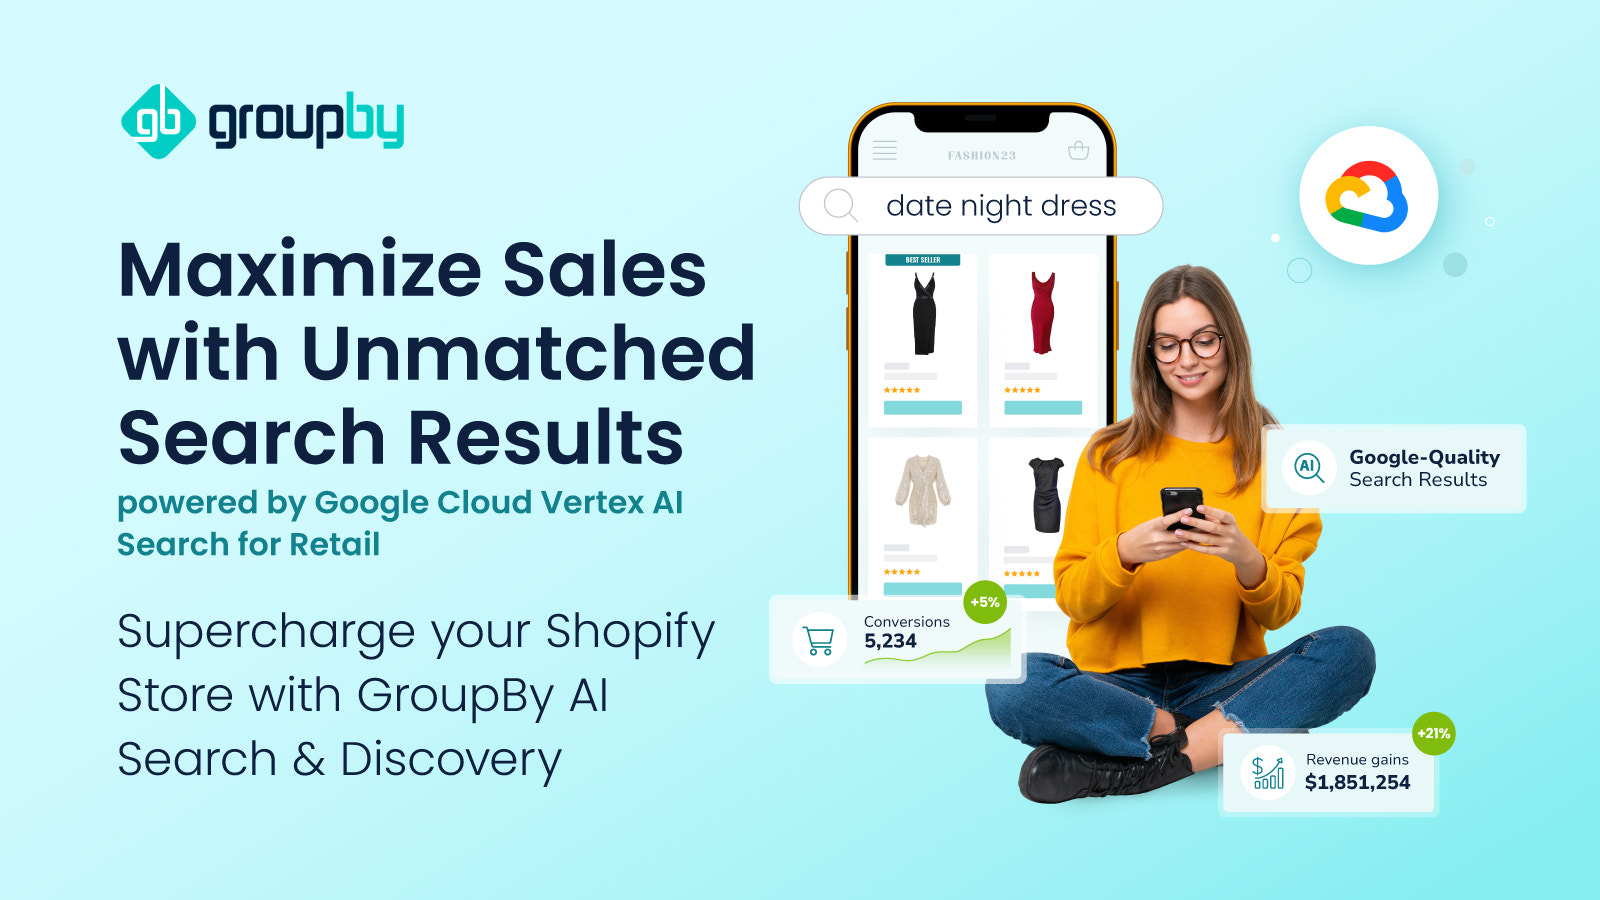 GroupBy AI Search & Discovery